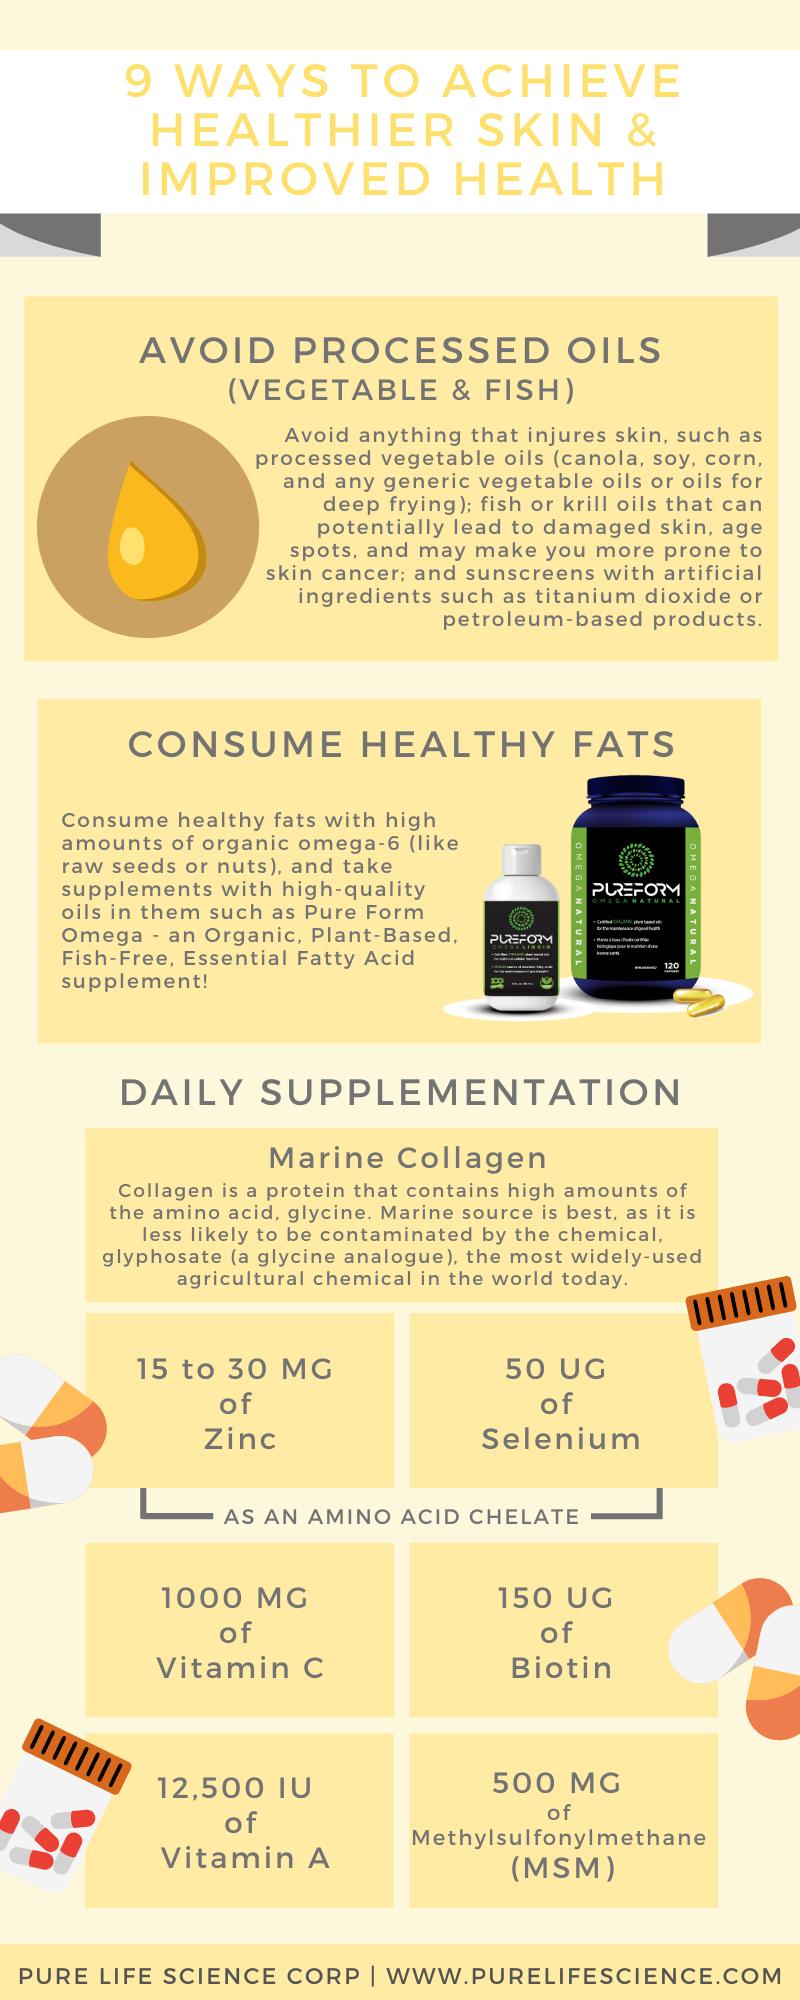 9 Ways to Achieve Healthier Skin & Improved Health Infographic | Pure Life Science